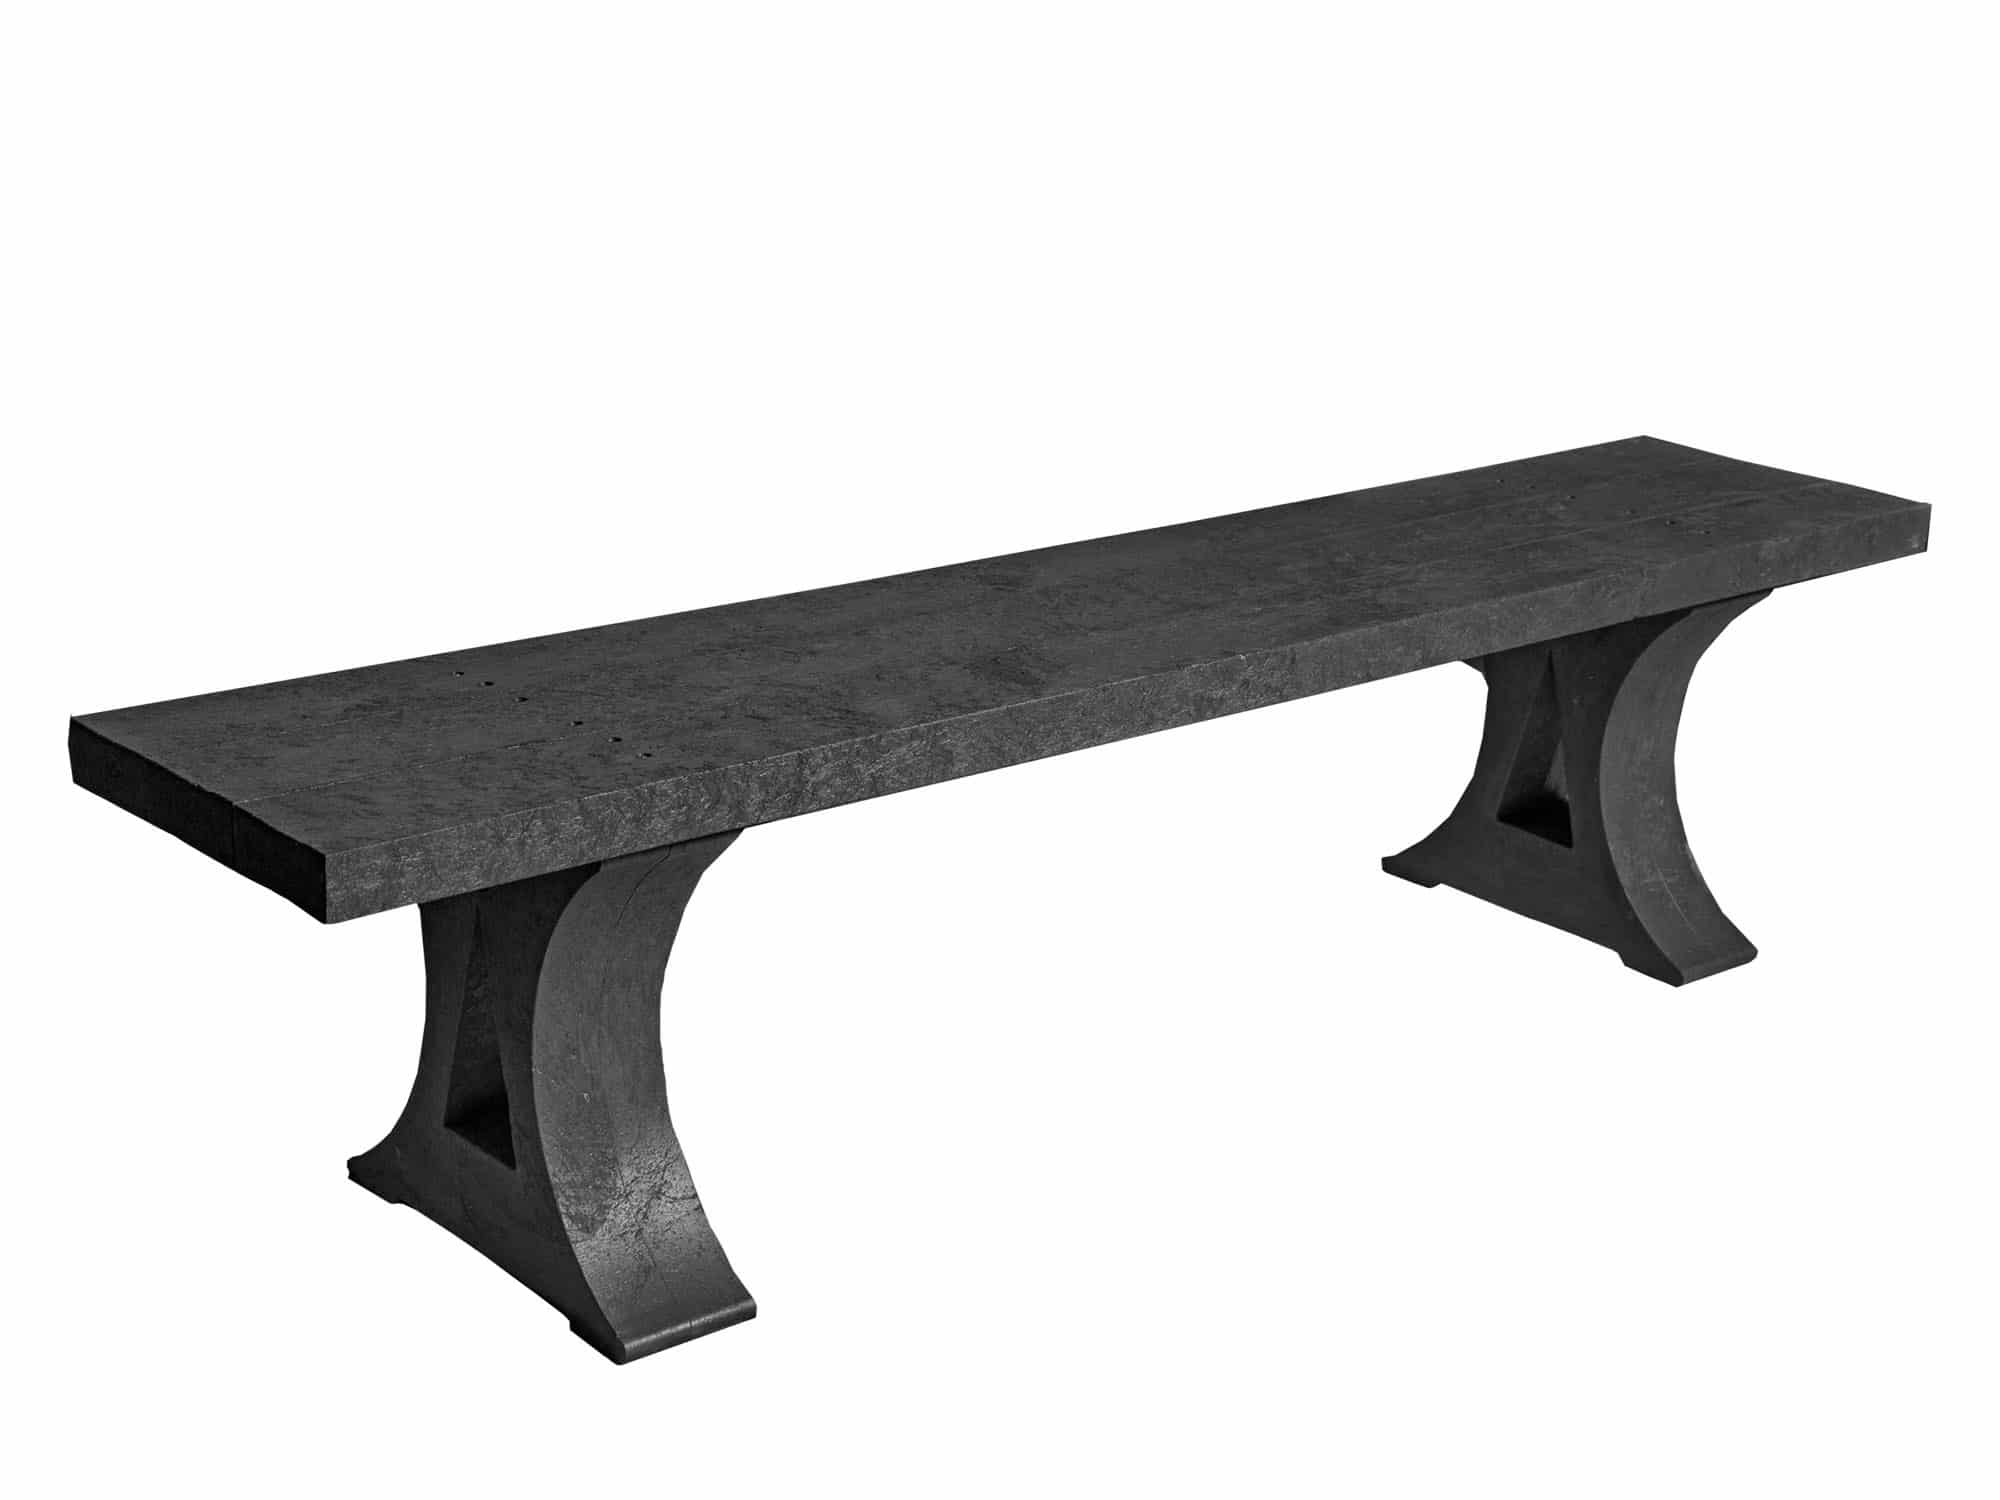 The Denholme classic recycled plastic A-frame adult picnic table, seen here in black